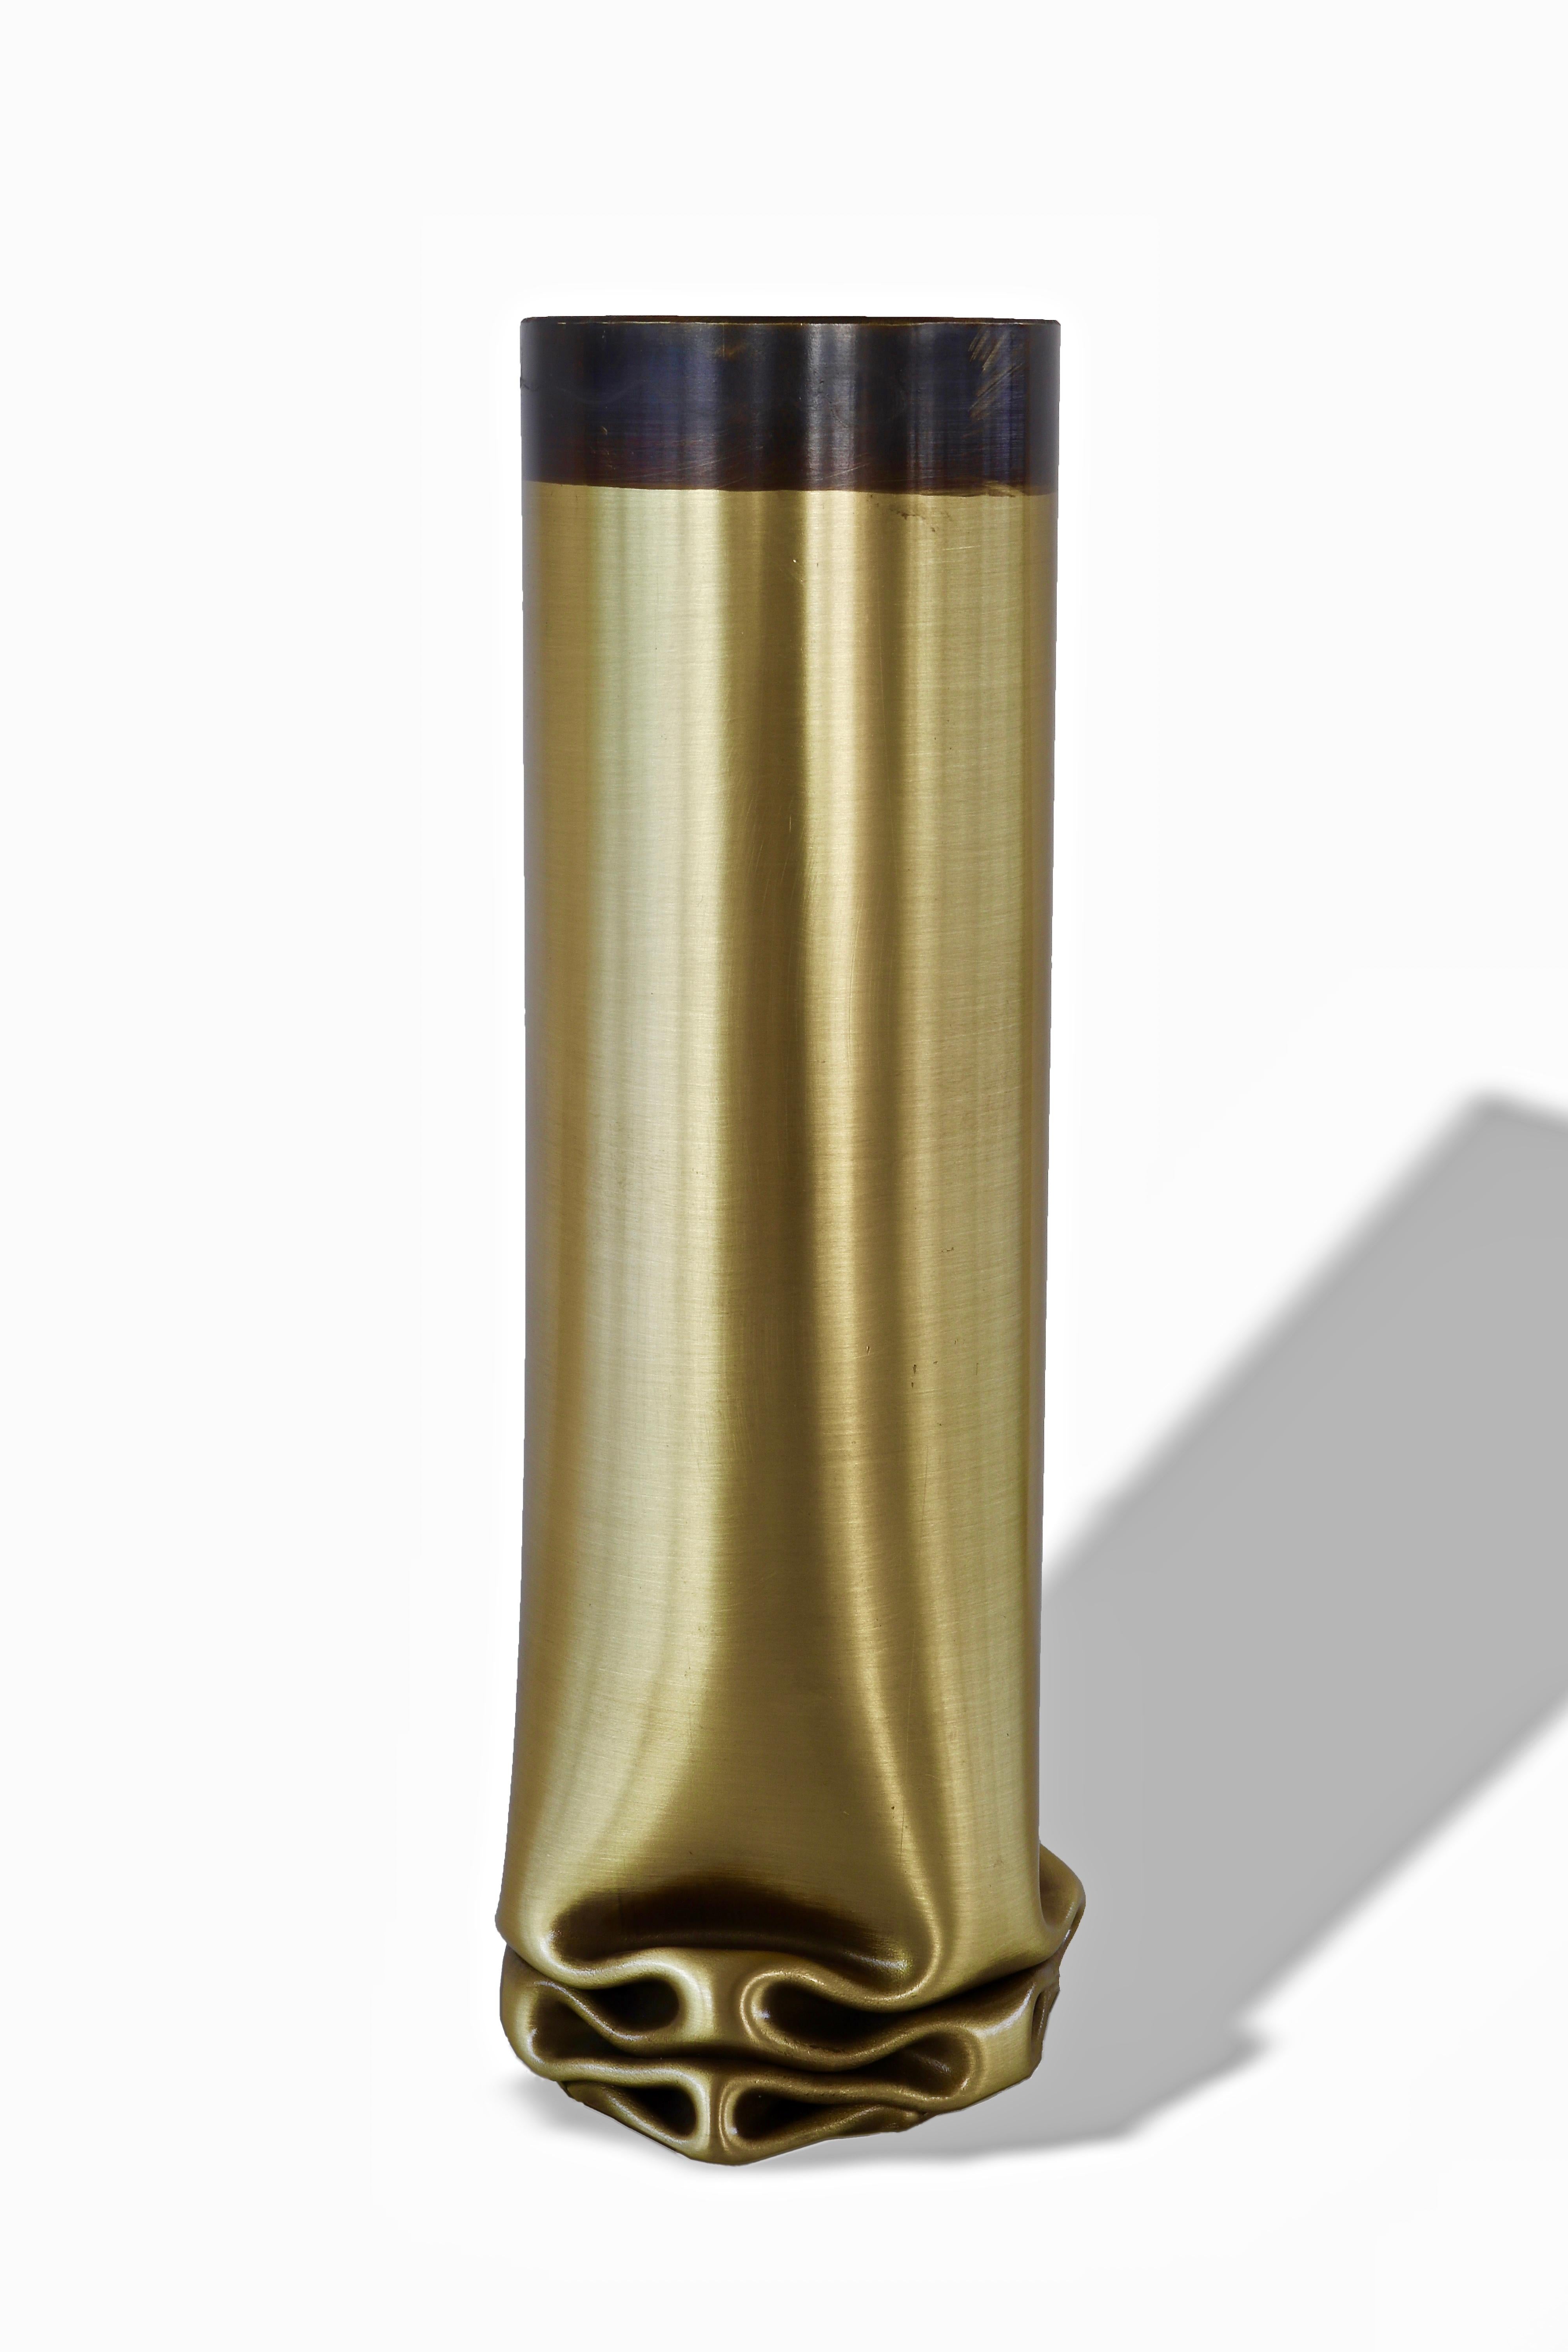 Cylindrical modern vase in brass molded with fire to obtain the effect of a piece that is melting. The surface can be natural satin brass or bronze patina brass .Part of the hot brass/copper collection.
The hot brass vase can be exposed together